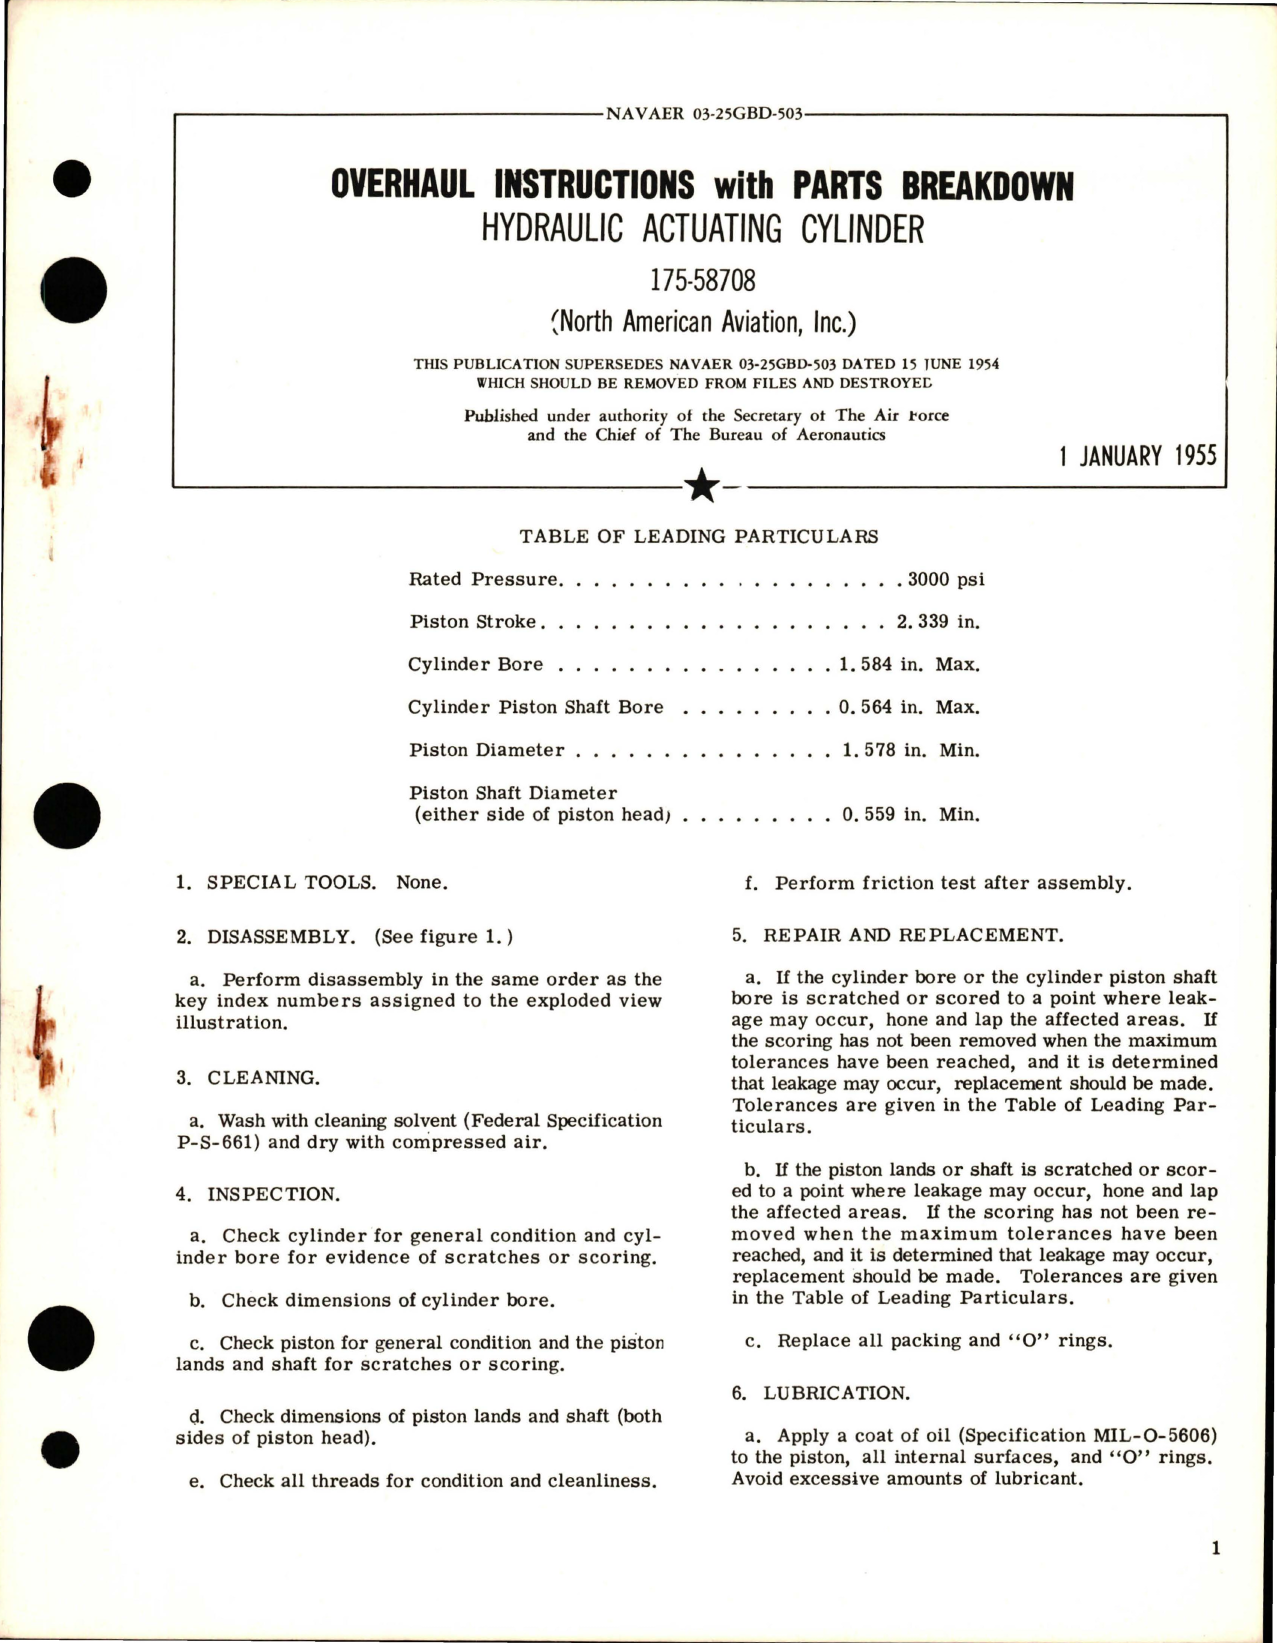 Sample page 1 from AirCorps Library document: Overhaul Instructions with Parts Breakdown for Hydraulic Actuating Cylinder - 175-58708 